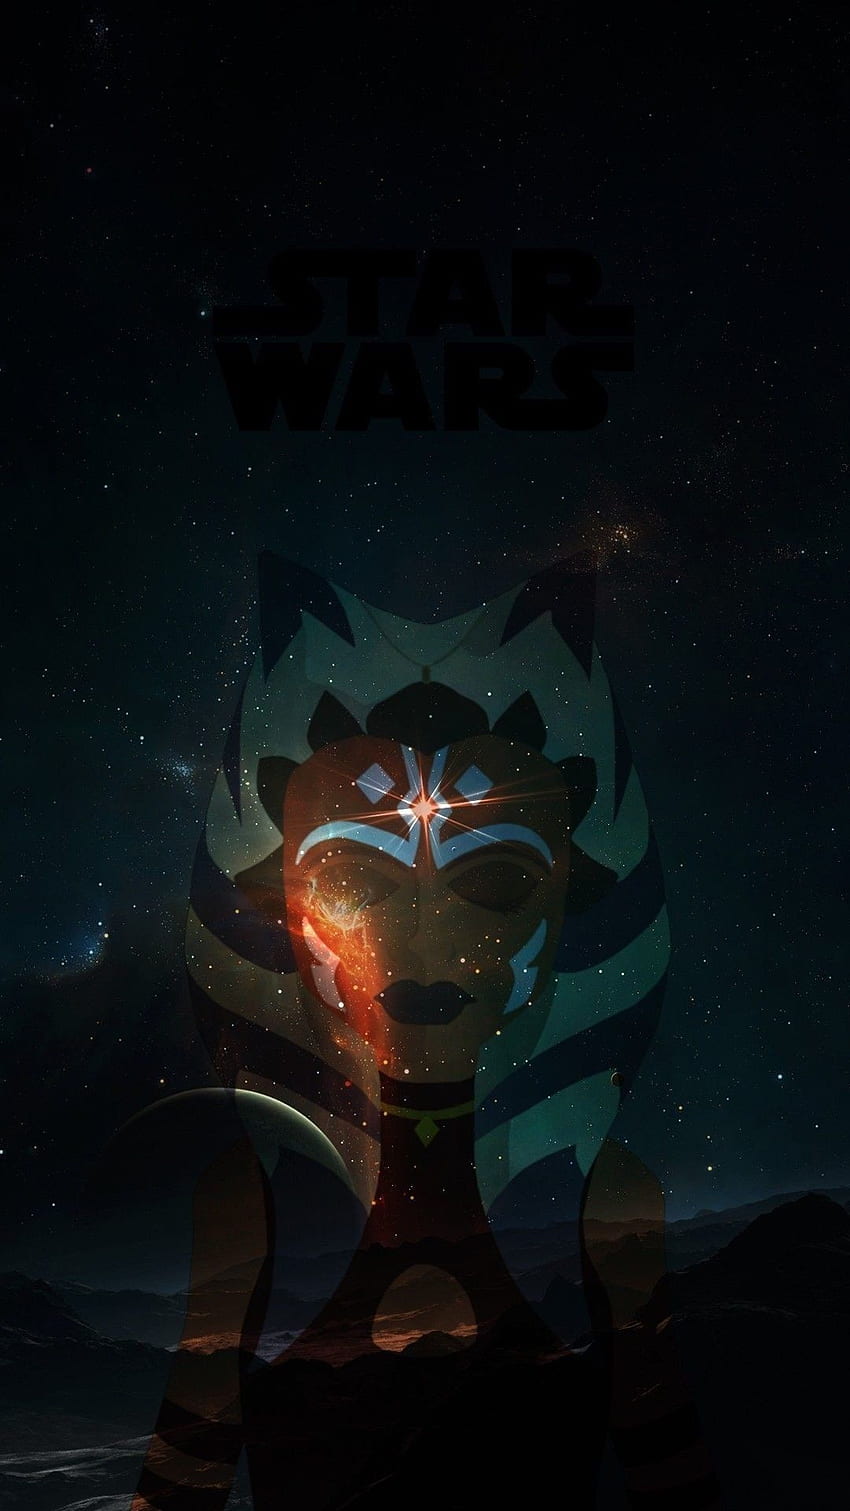 1080x1920 Star Wars Wallpapers for Android Mobile Smartphone Full HD